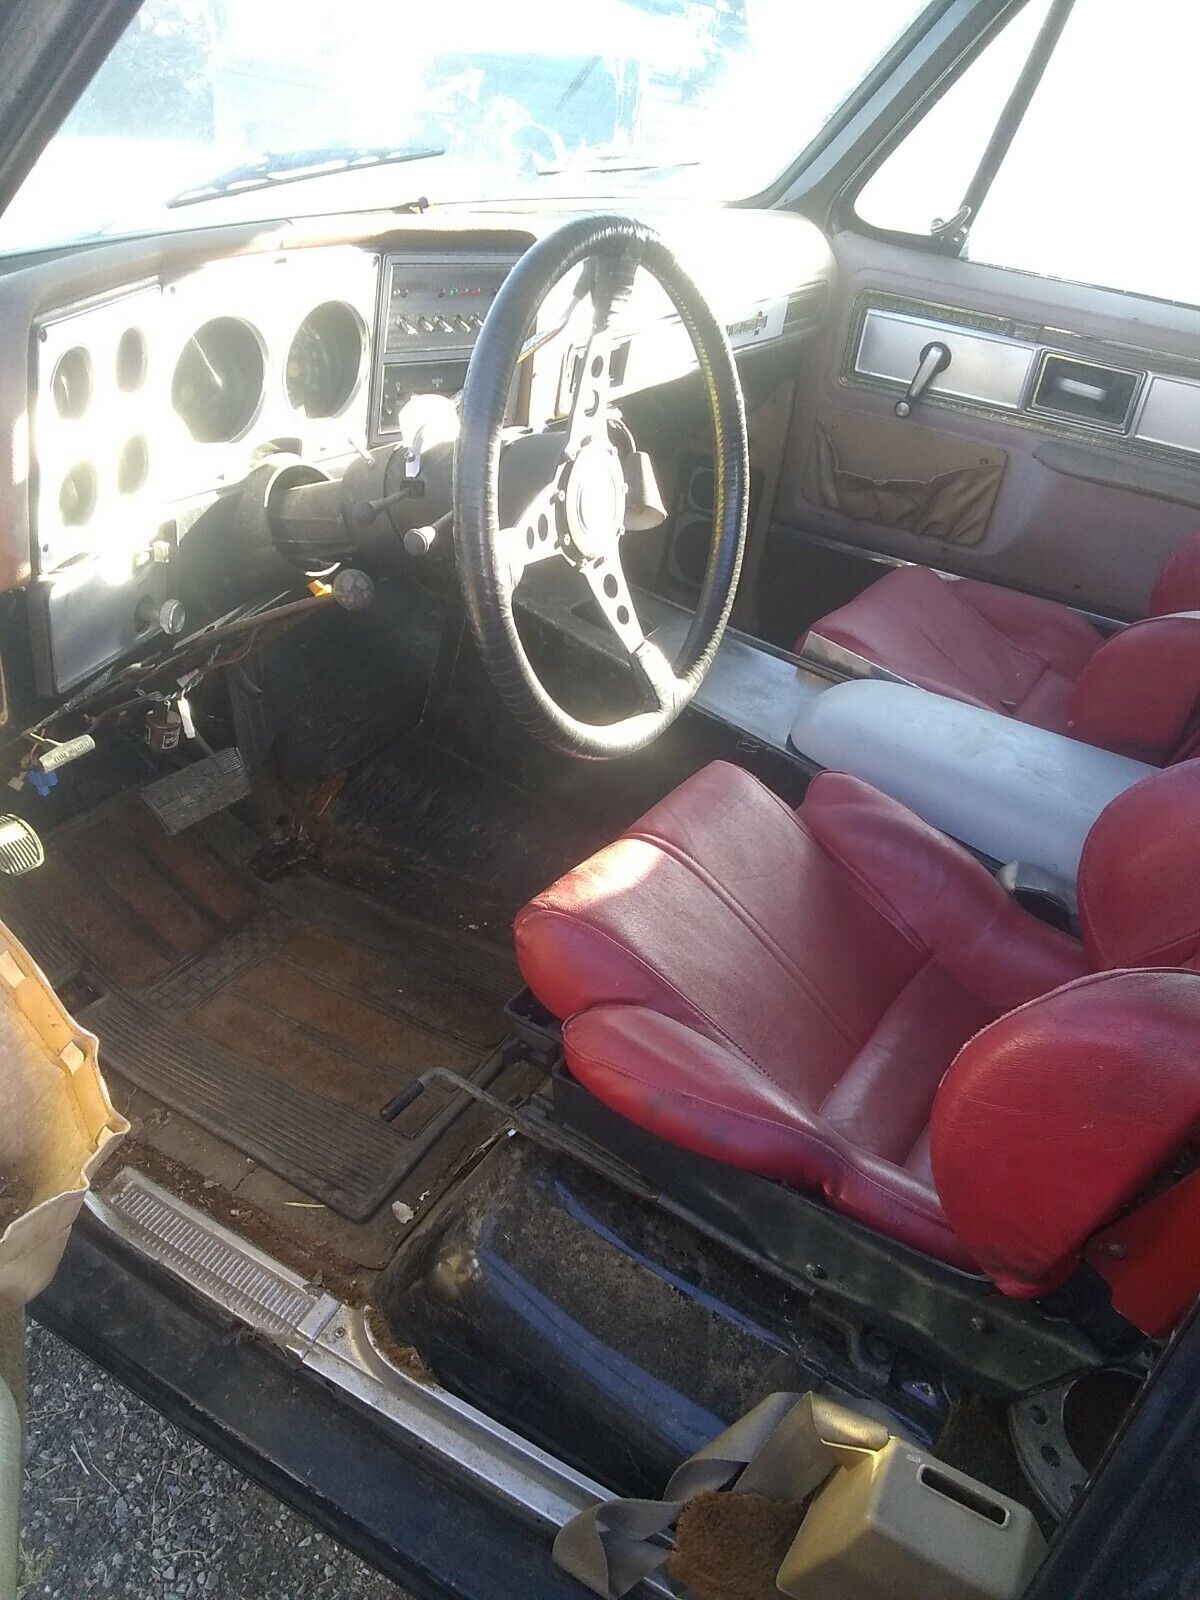 1987 chevy corvette front seats,red leather,some wear.no power frame rails.